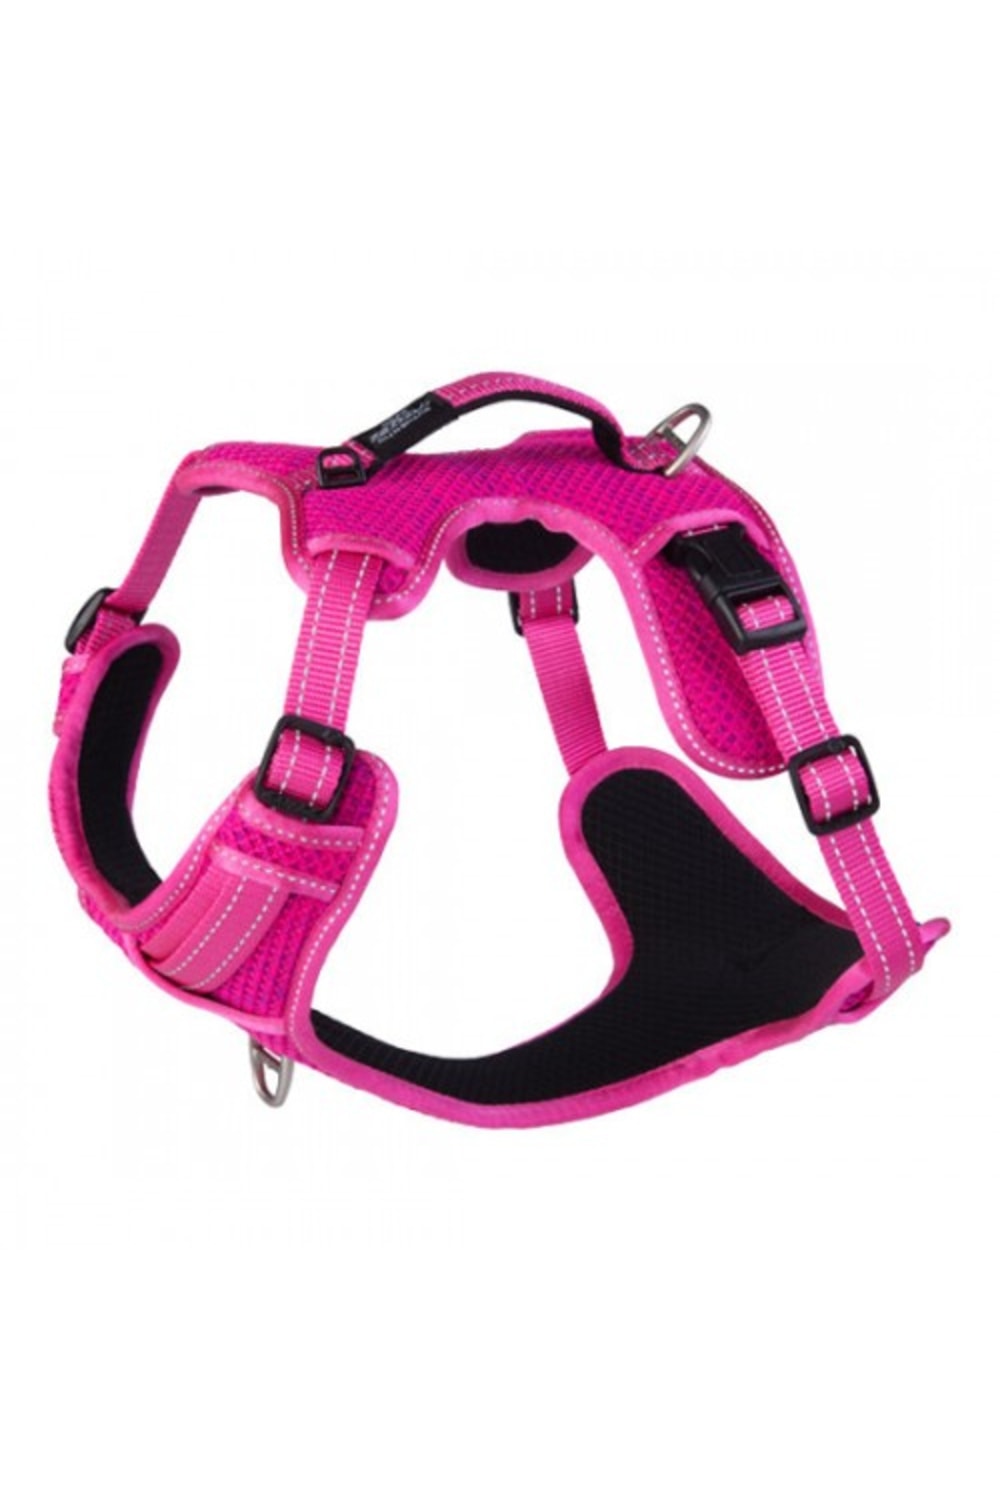 Rogz Utility Explore Dog Harness (Pink) (20.87in - 28.74in)